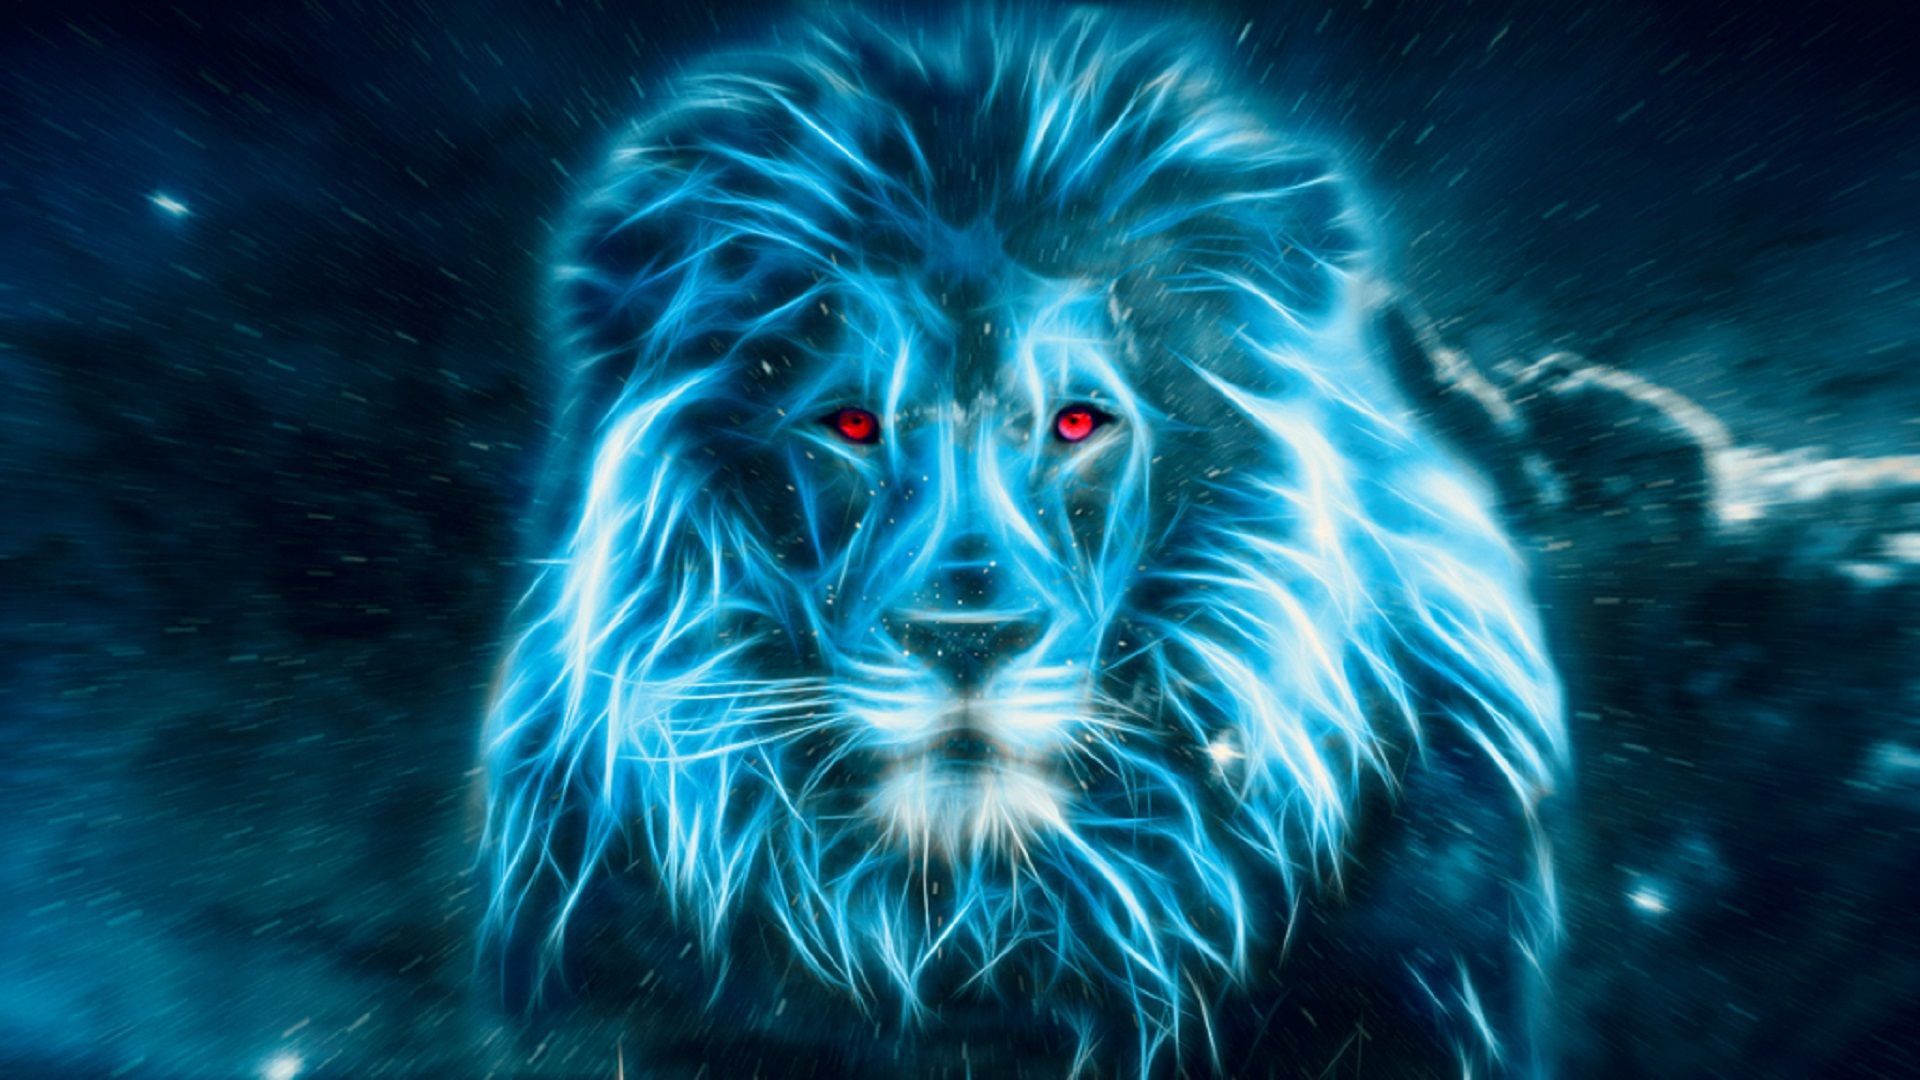 Lion In Blue Wallpapers[19201080] - Blue Lion Images Hd - 1920x1080  Wallpaper 